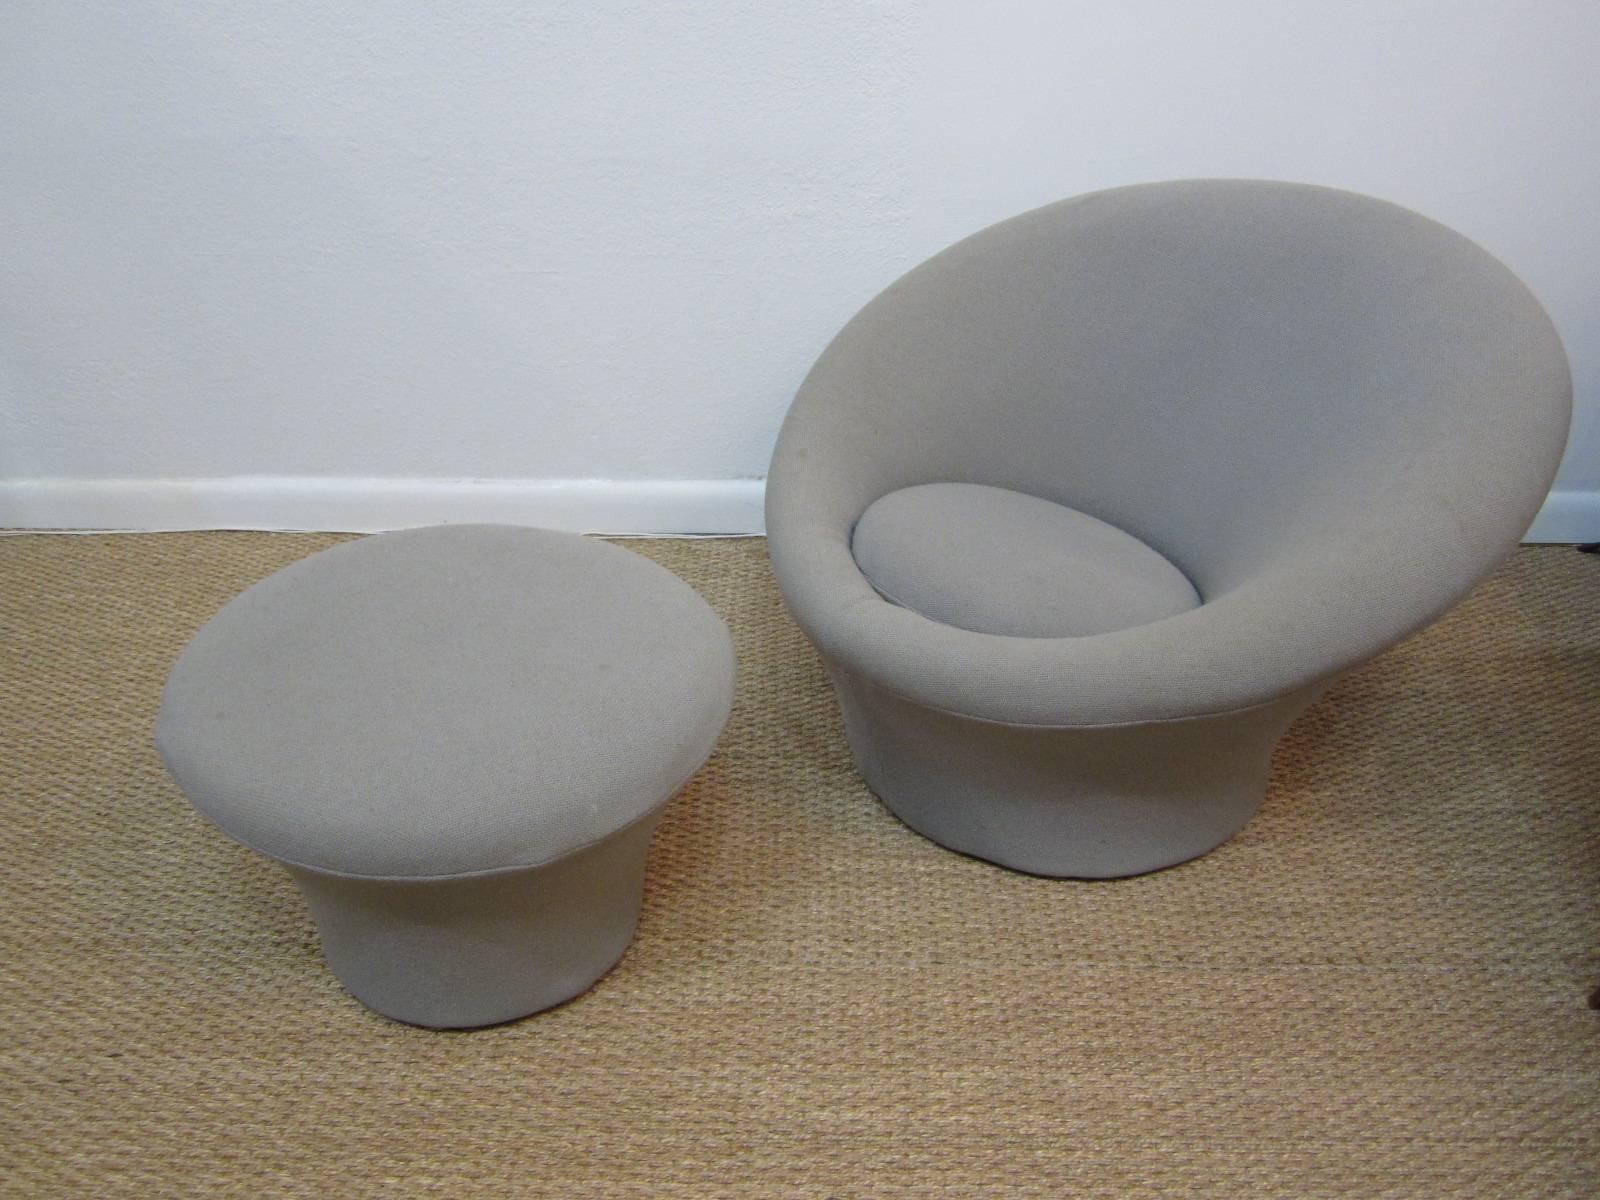 Pierre Paulin Mushroom chair with Ottoman for Artifort. The chair spins on its  wood base. Original Arifort sticker remains. Original grey stretch fabric could be cleaned and or changed as it shows age.....no tears. The ottoman  measures: 14 tall x